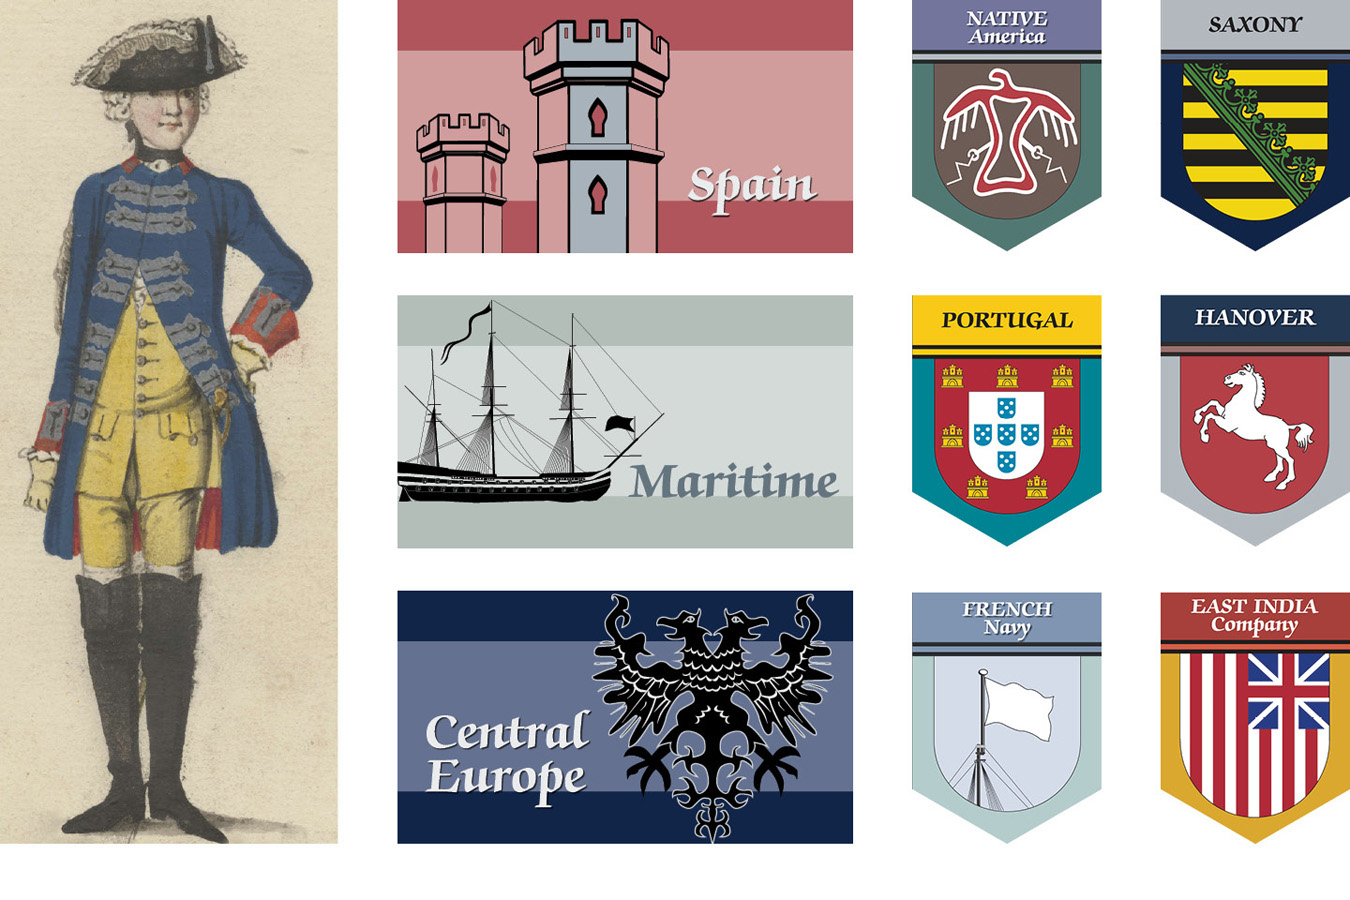 Display Grfx 9 : Flag and Banner Icons used in defining different areas within museum